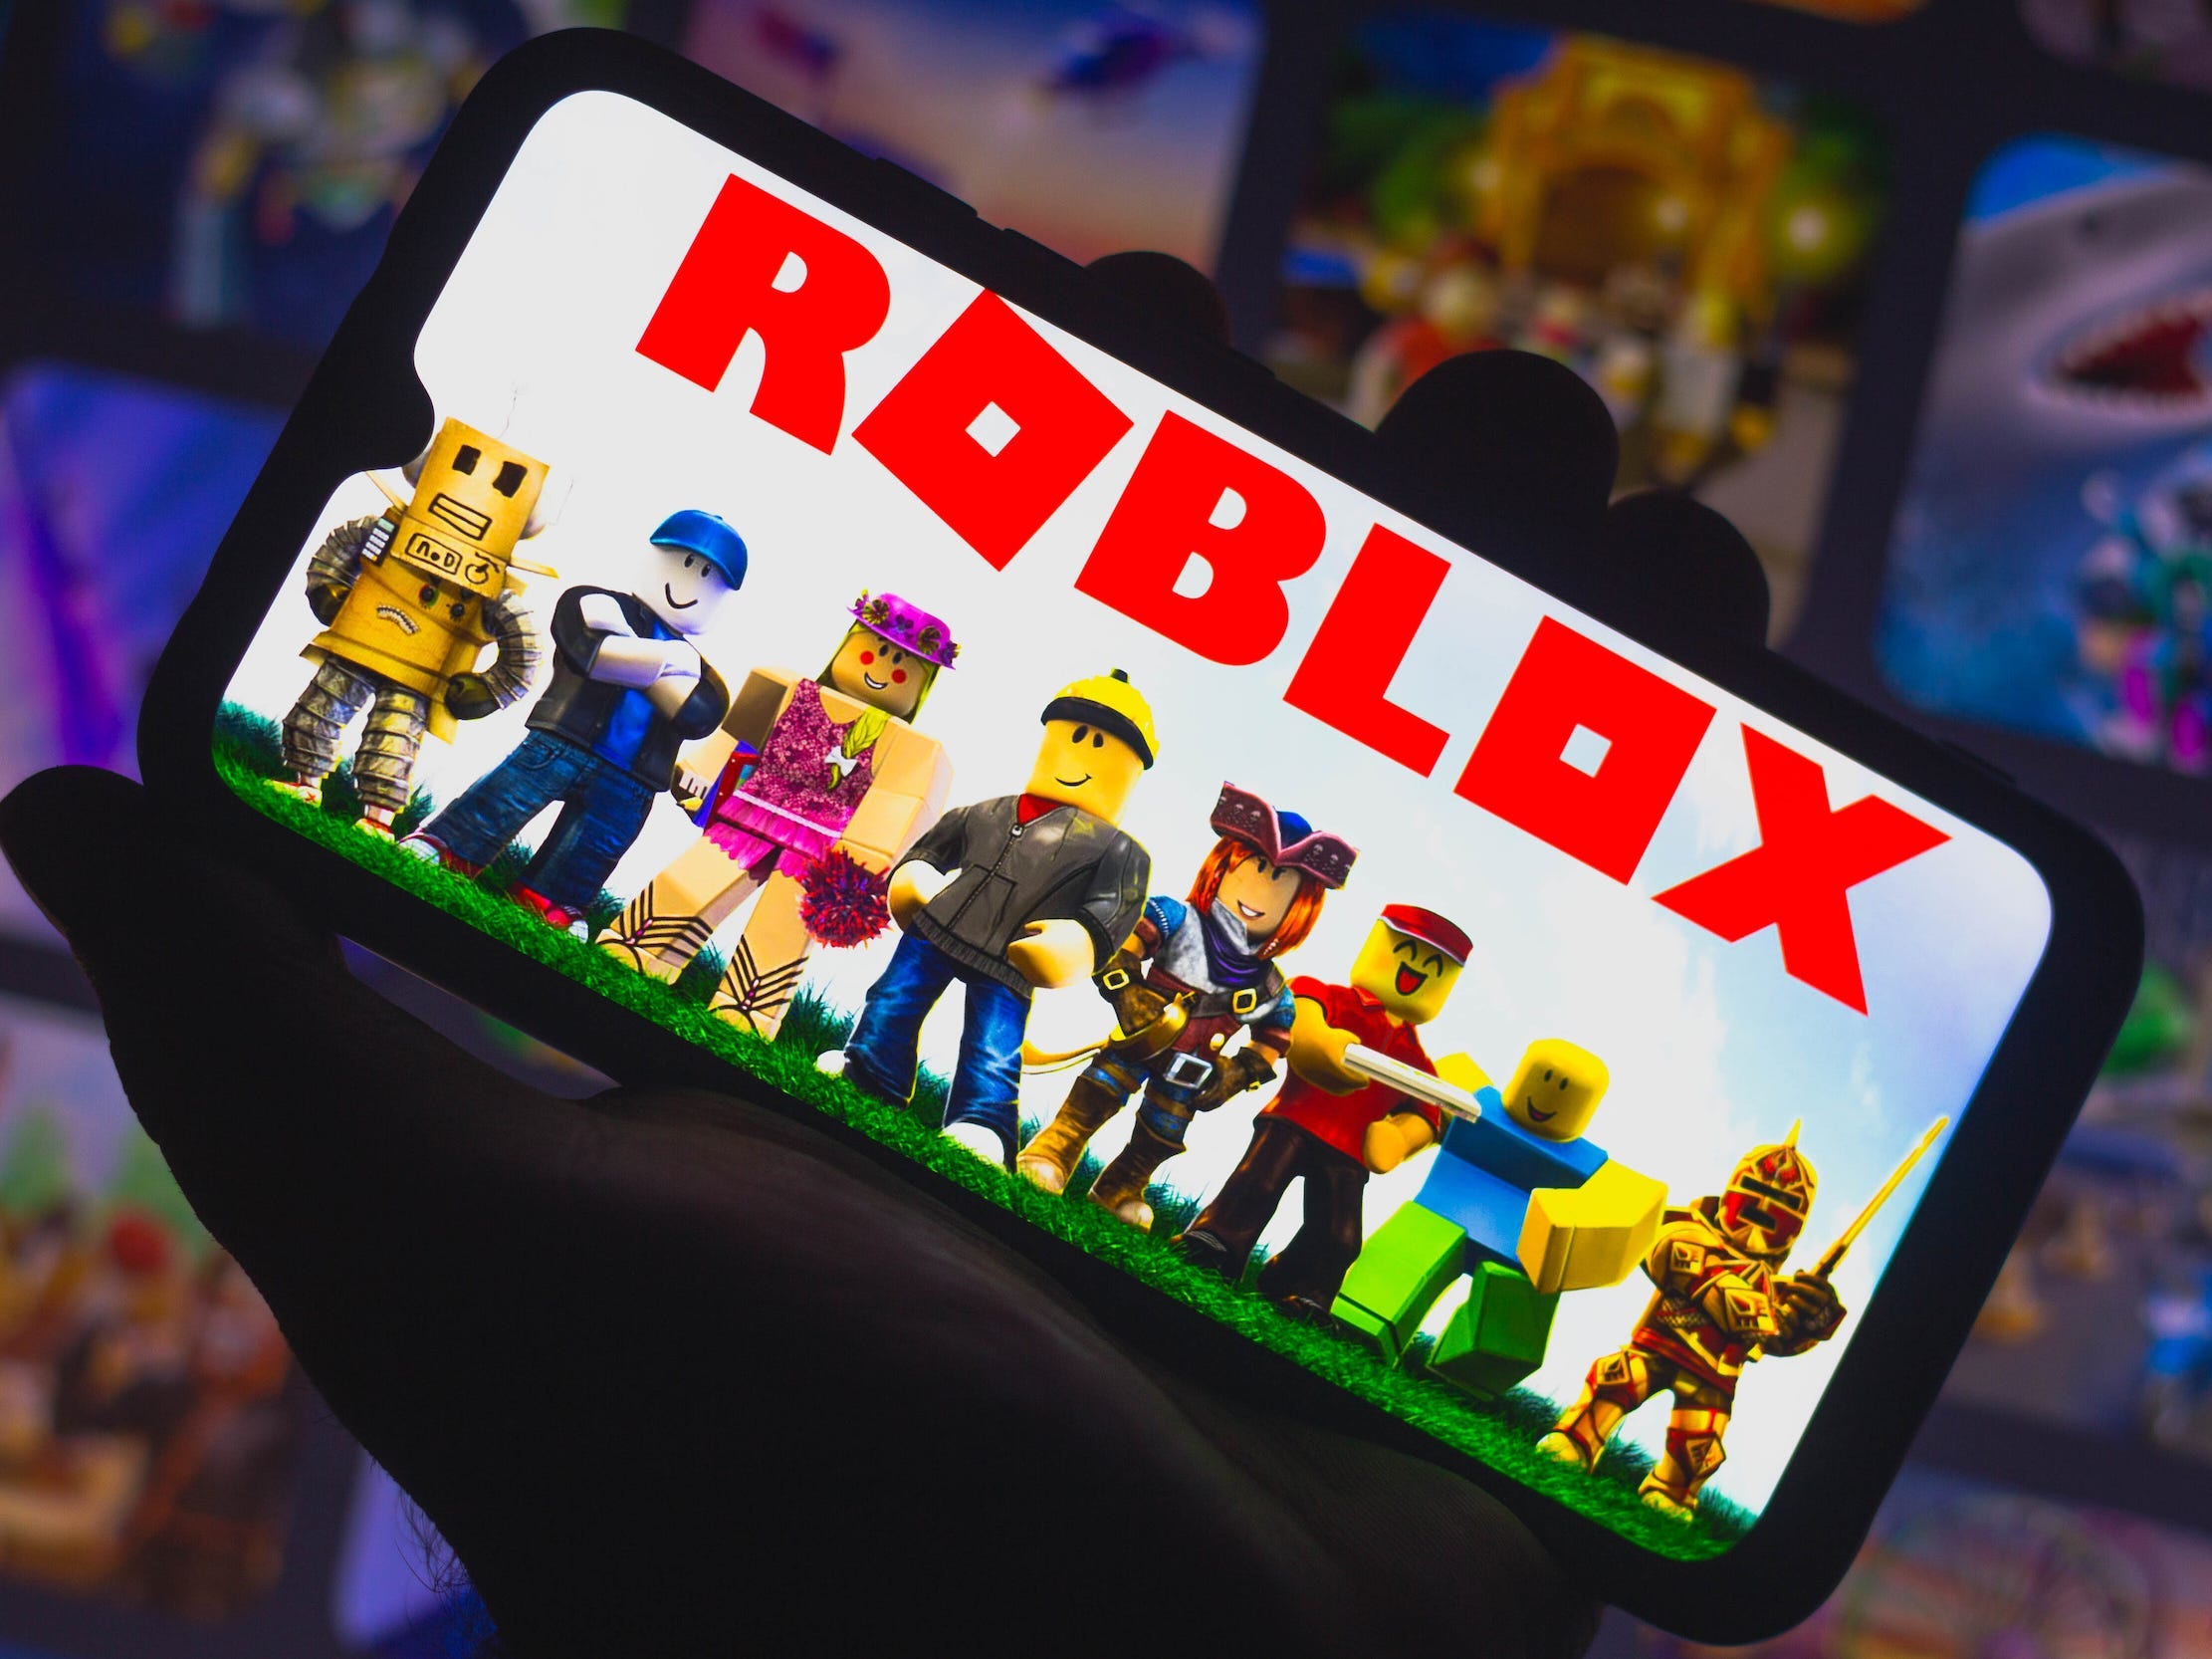 How to Refund Items and Robux on Roblox: Policy Explained